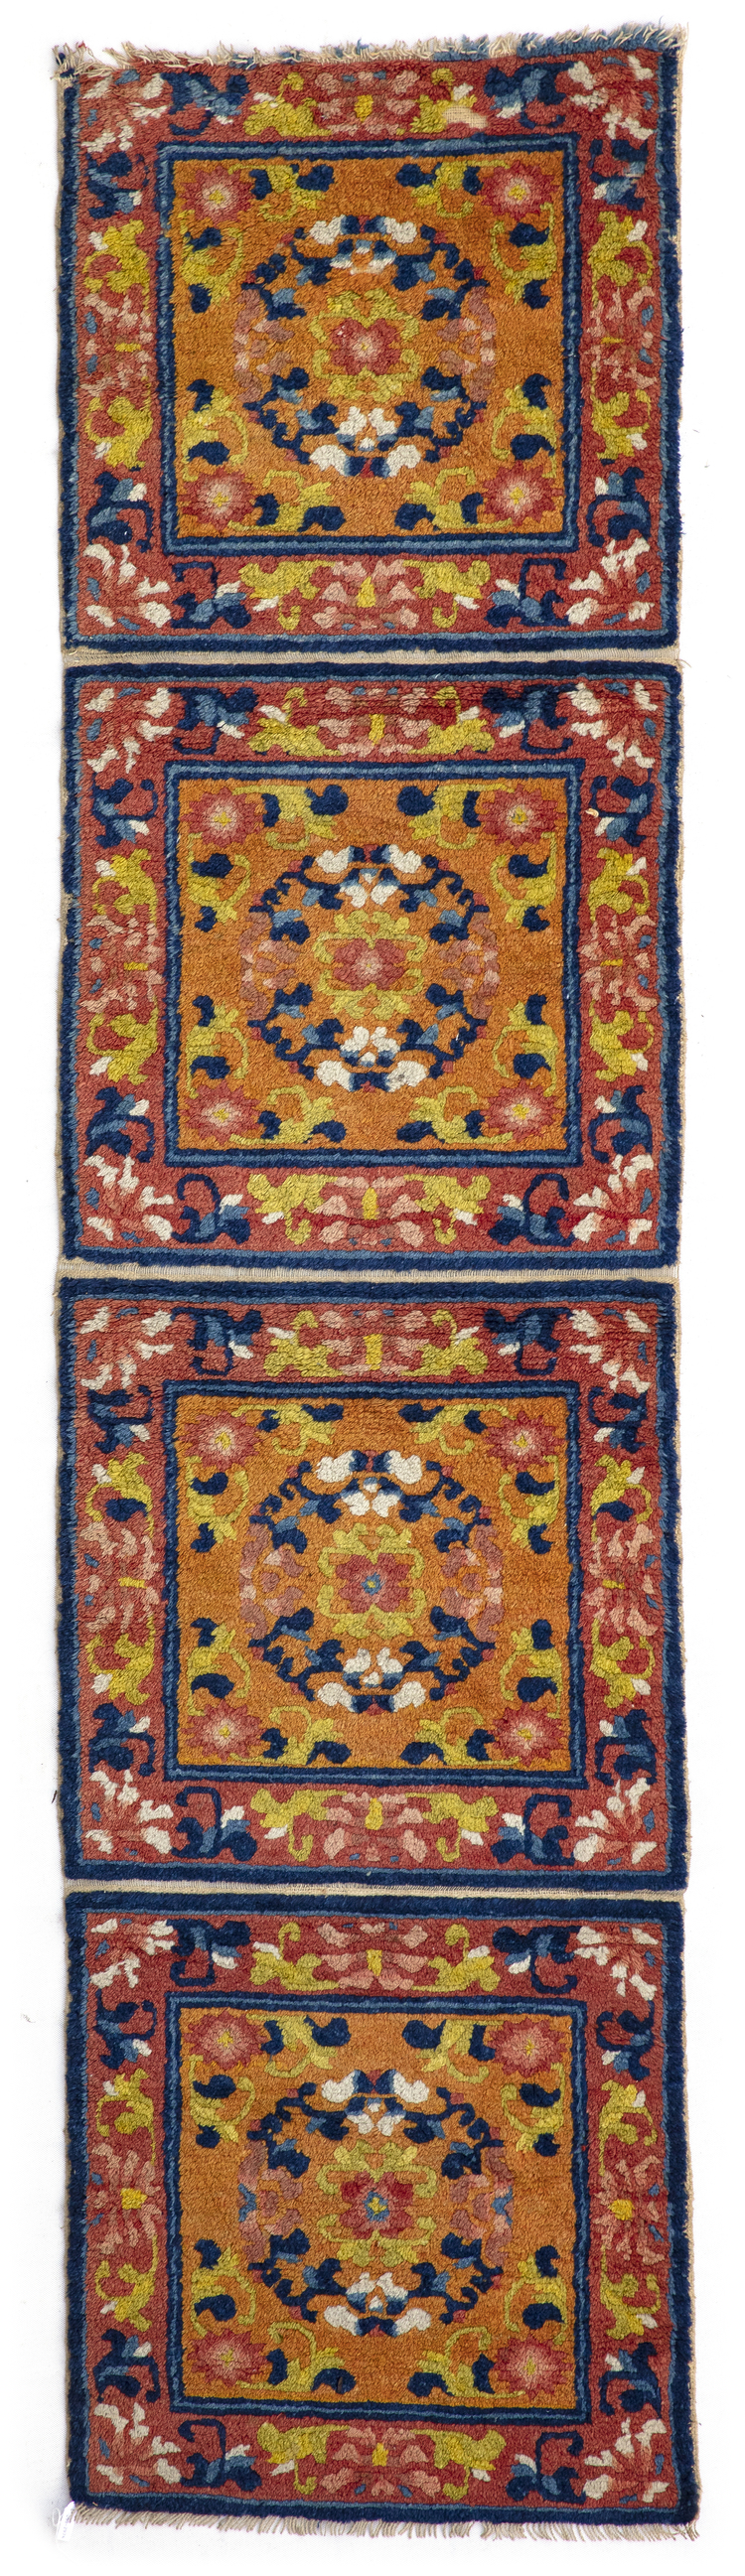 A CHINESE RUG, LATE 19TH CENTURY